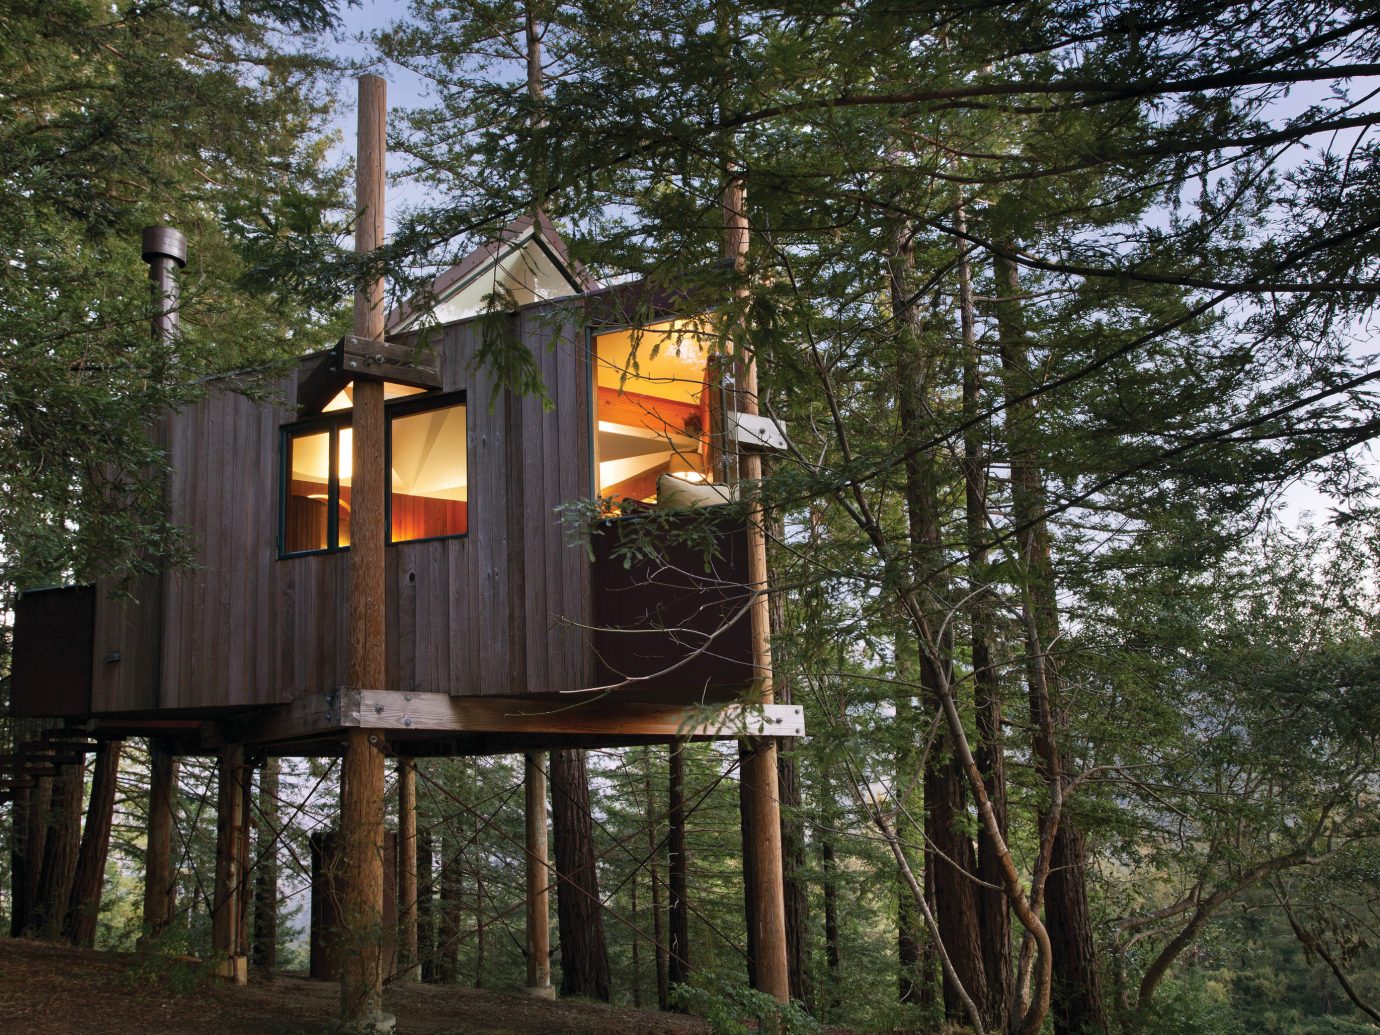 Hotels Trip Ideas tree outdoor house tree house log cabin home outdoor structure Forest wood wooded several